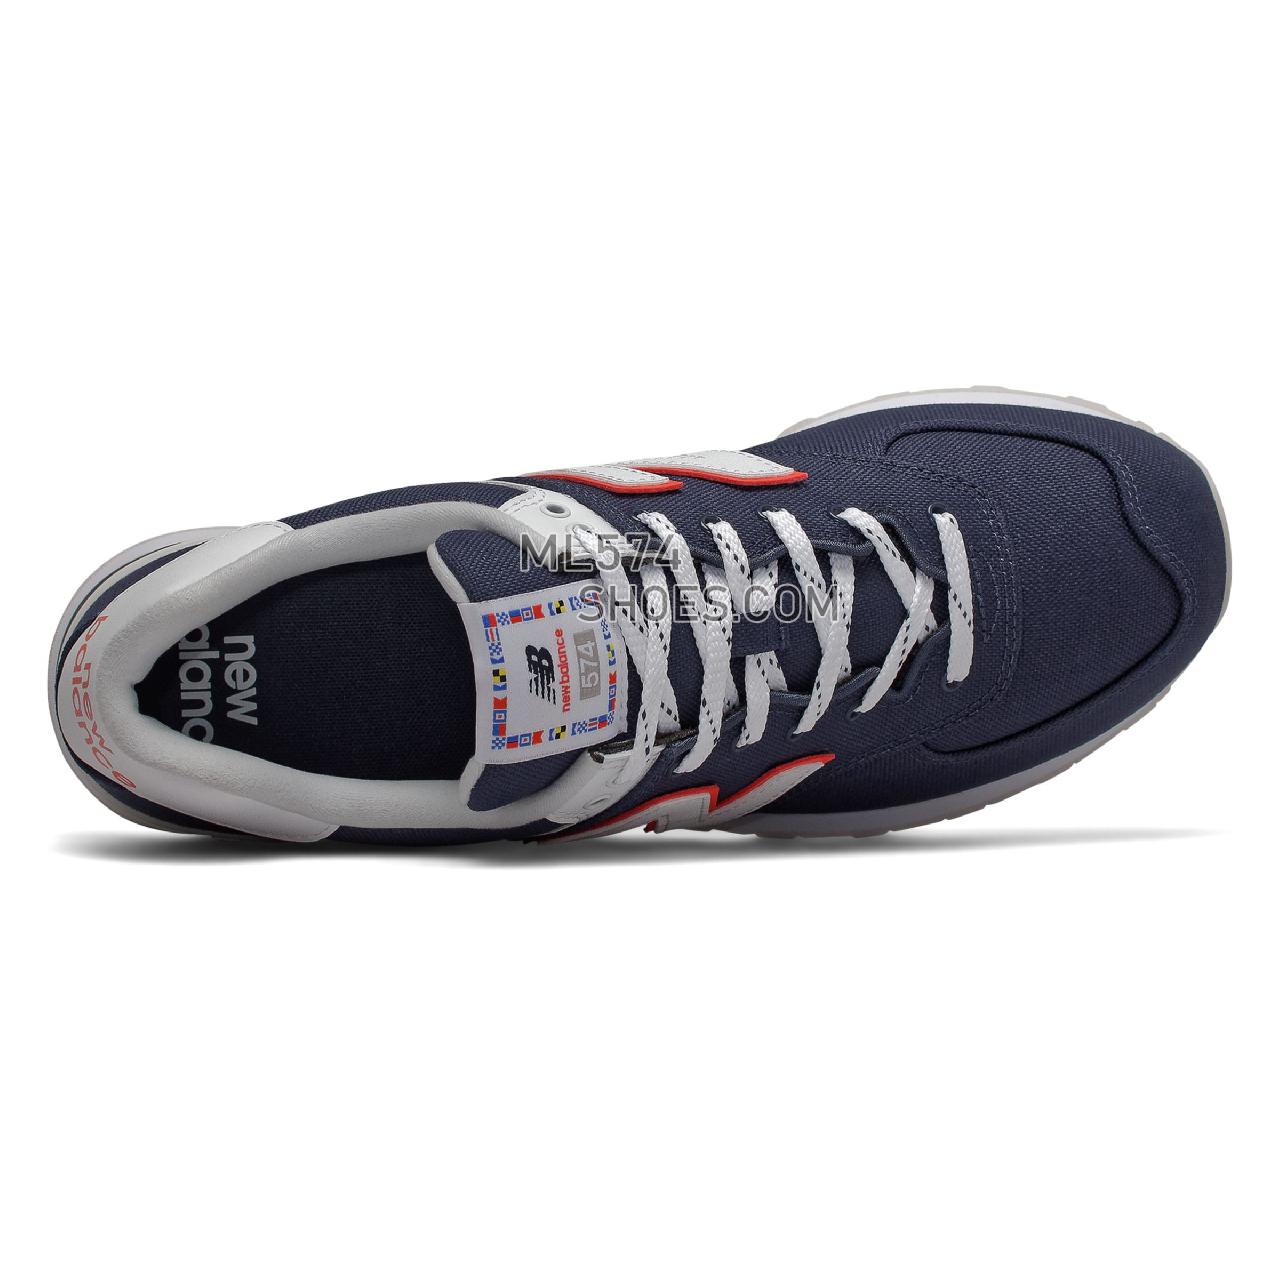 New Balance 574 - Men's Classic Sneakers - Navy with White - ML574SOP